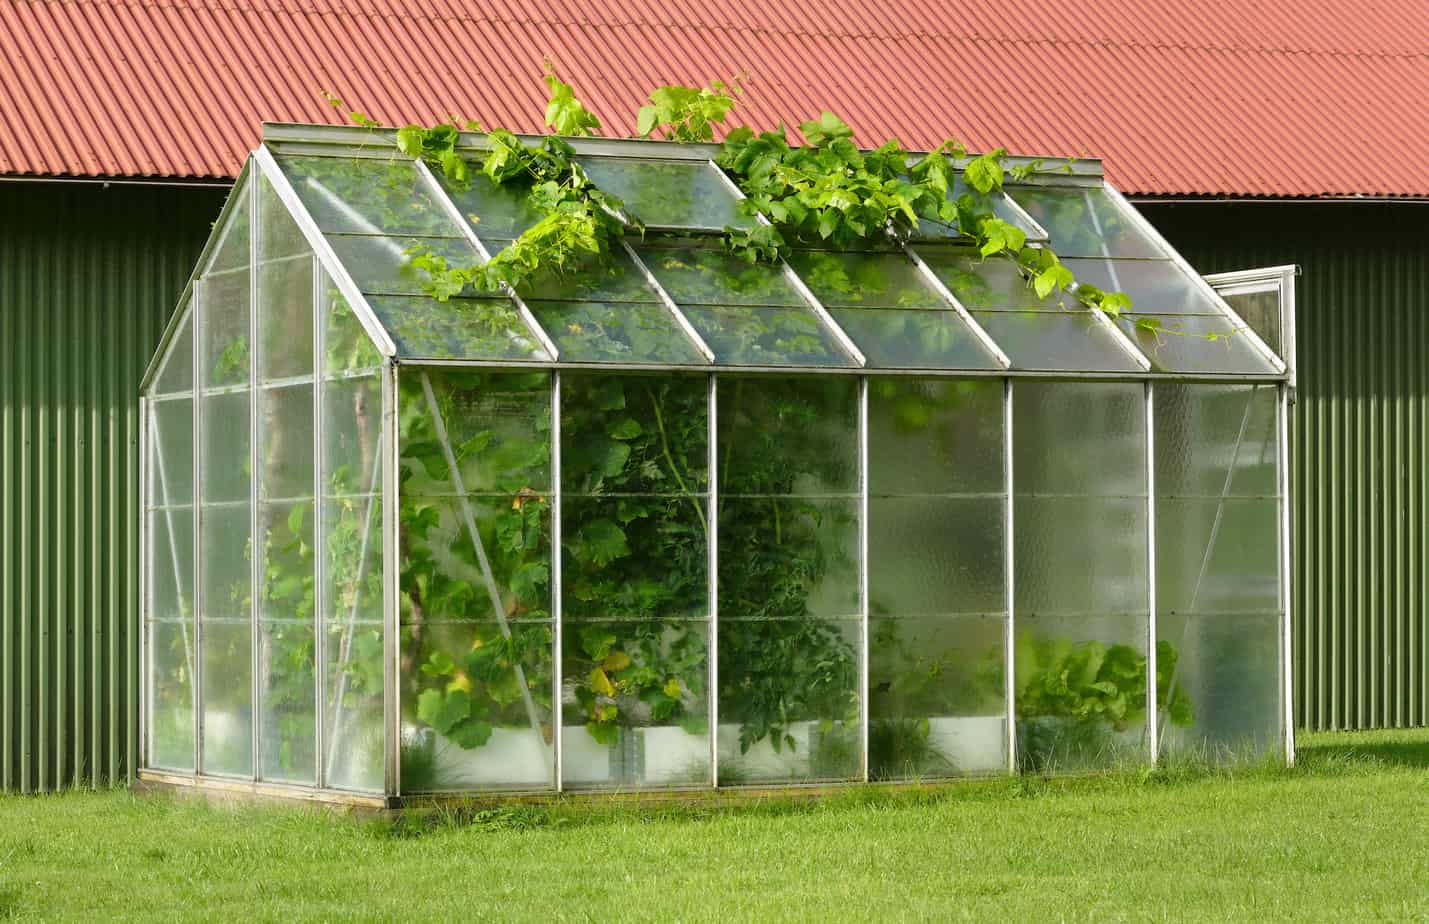 crops suitable for greenhouse farming